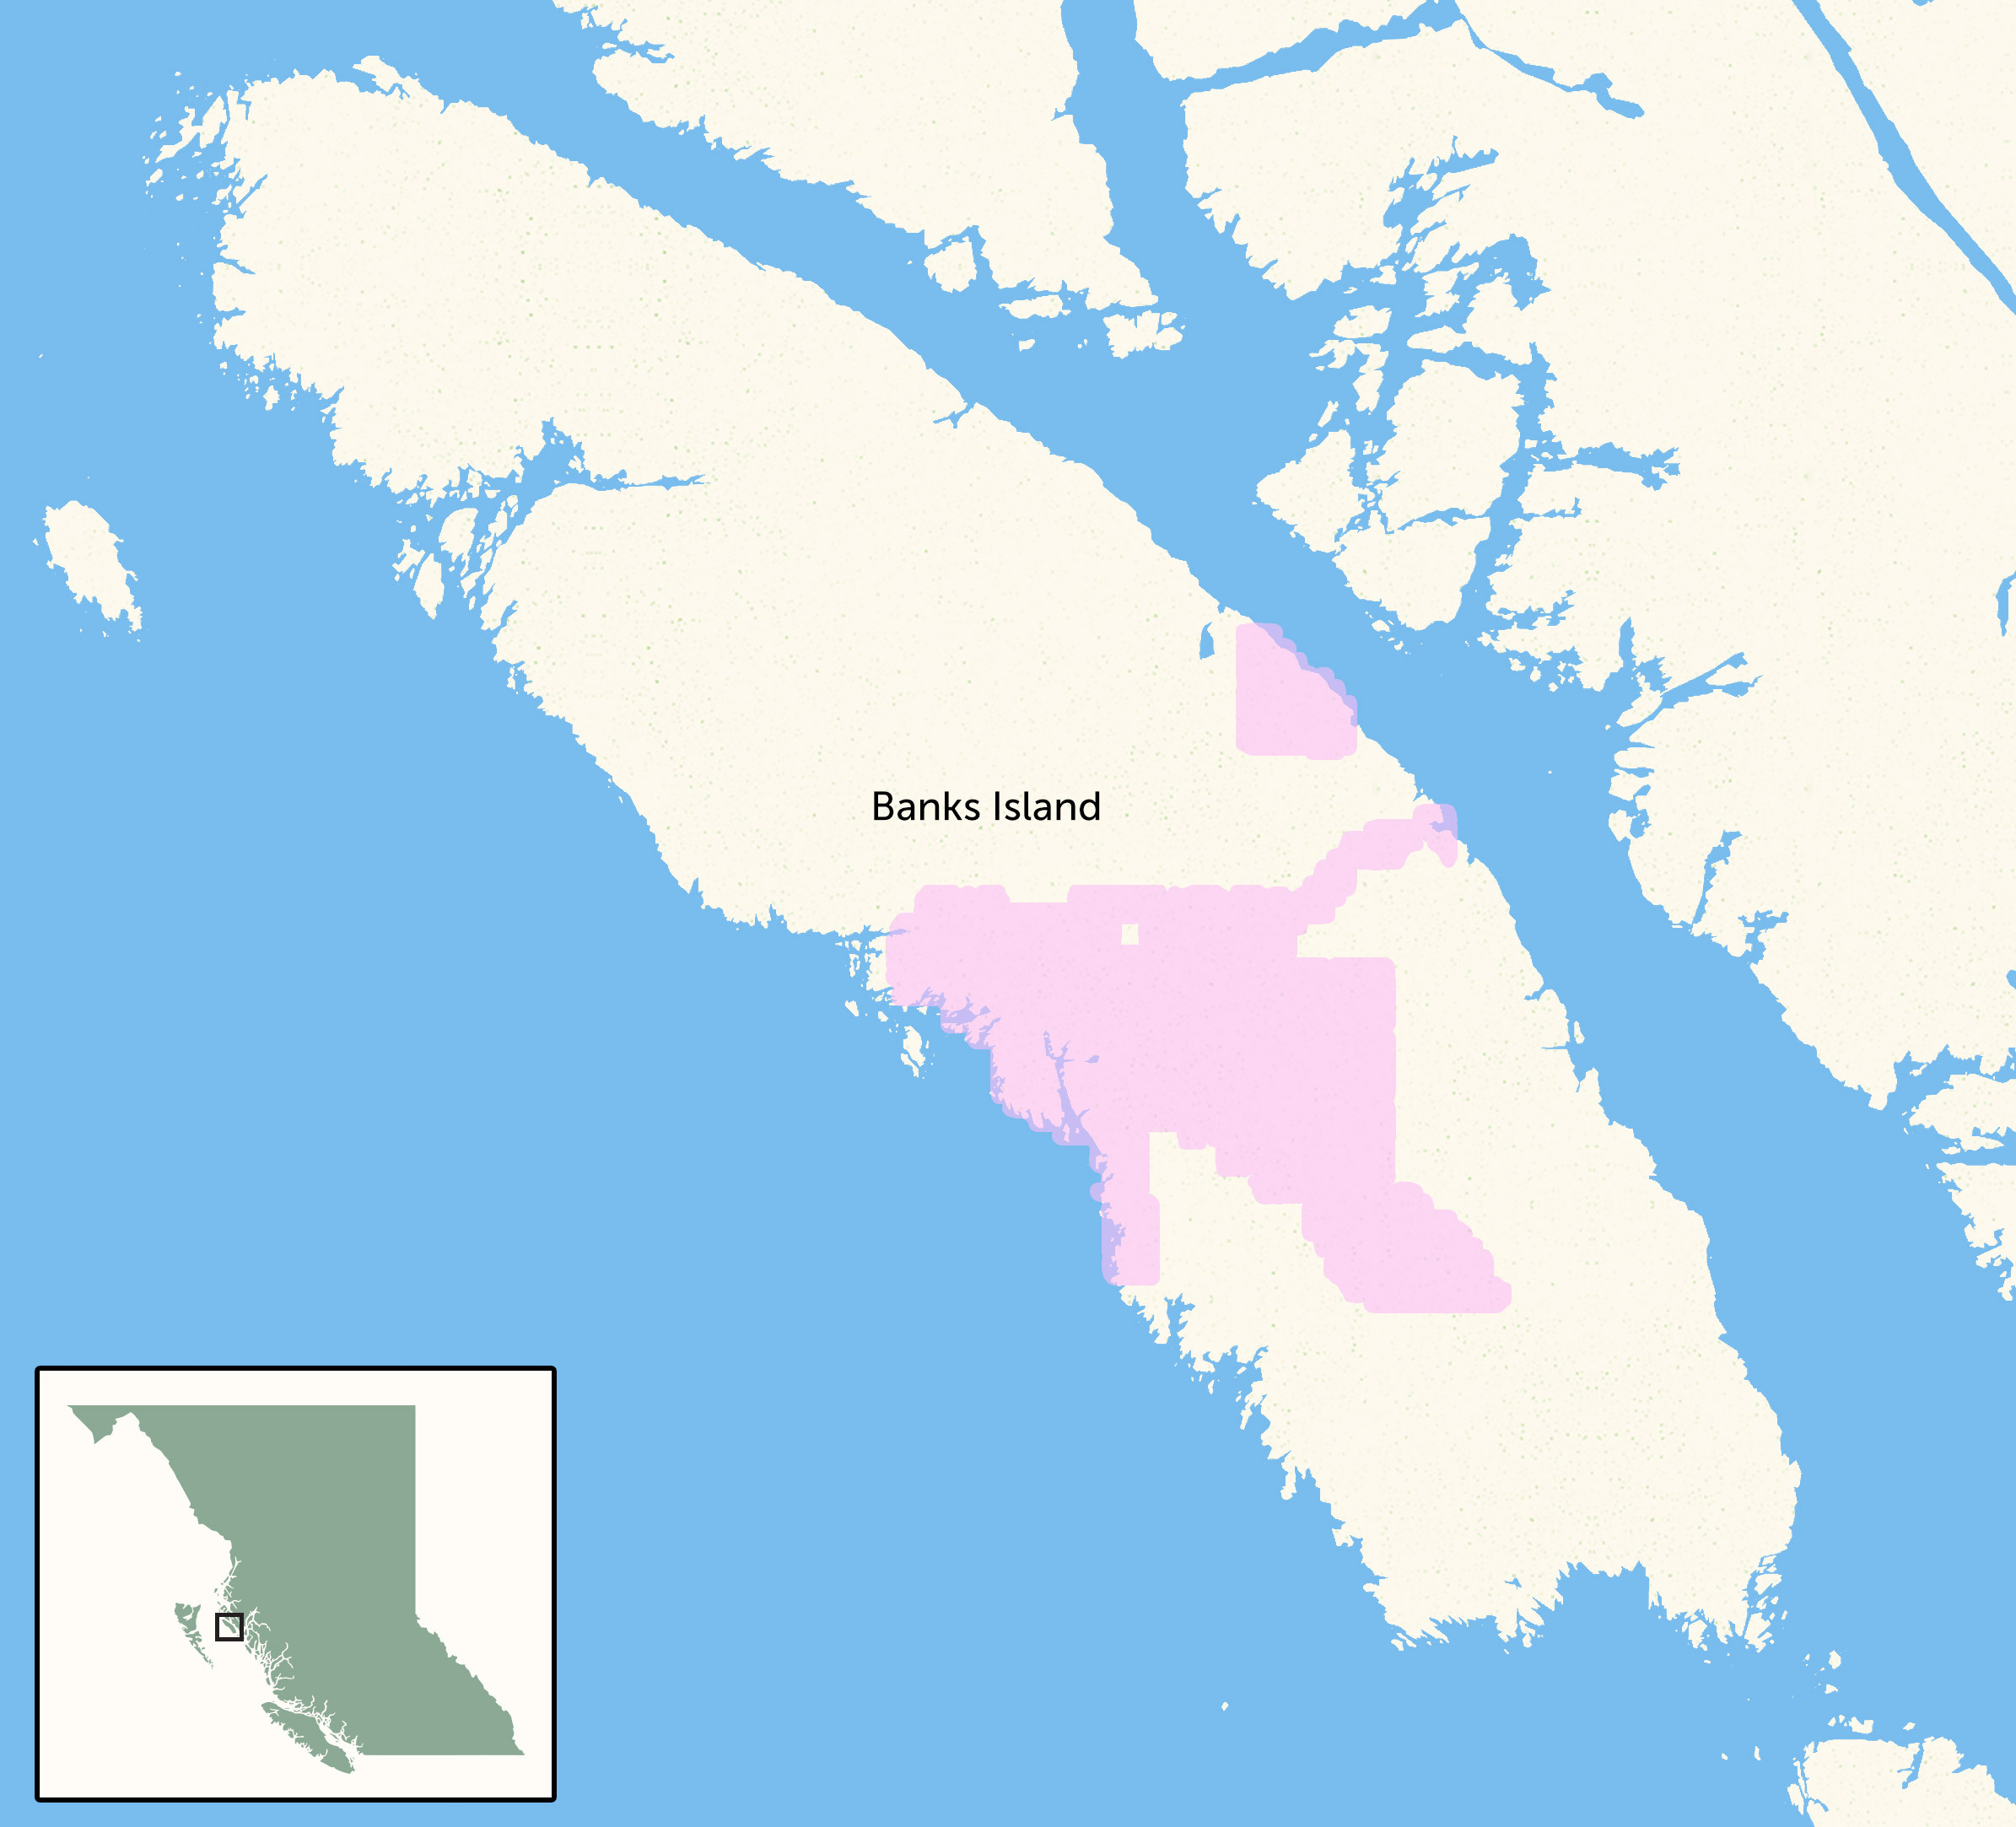 A map of Banks Island with a pink shaded area to show mineral claims in the centre of the island.